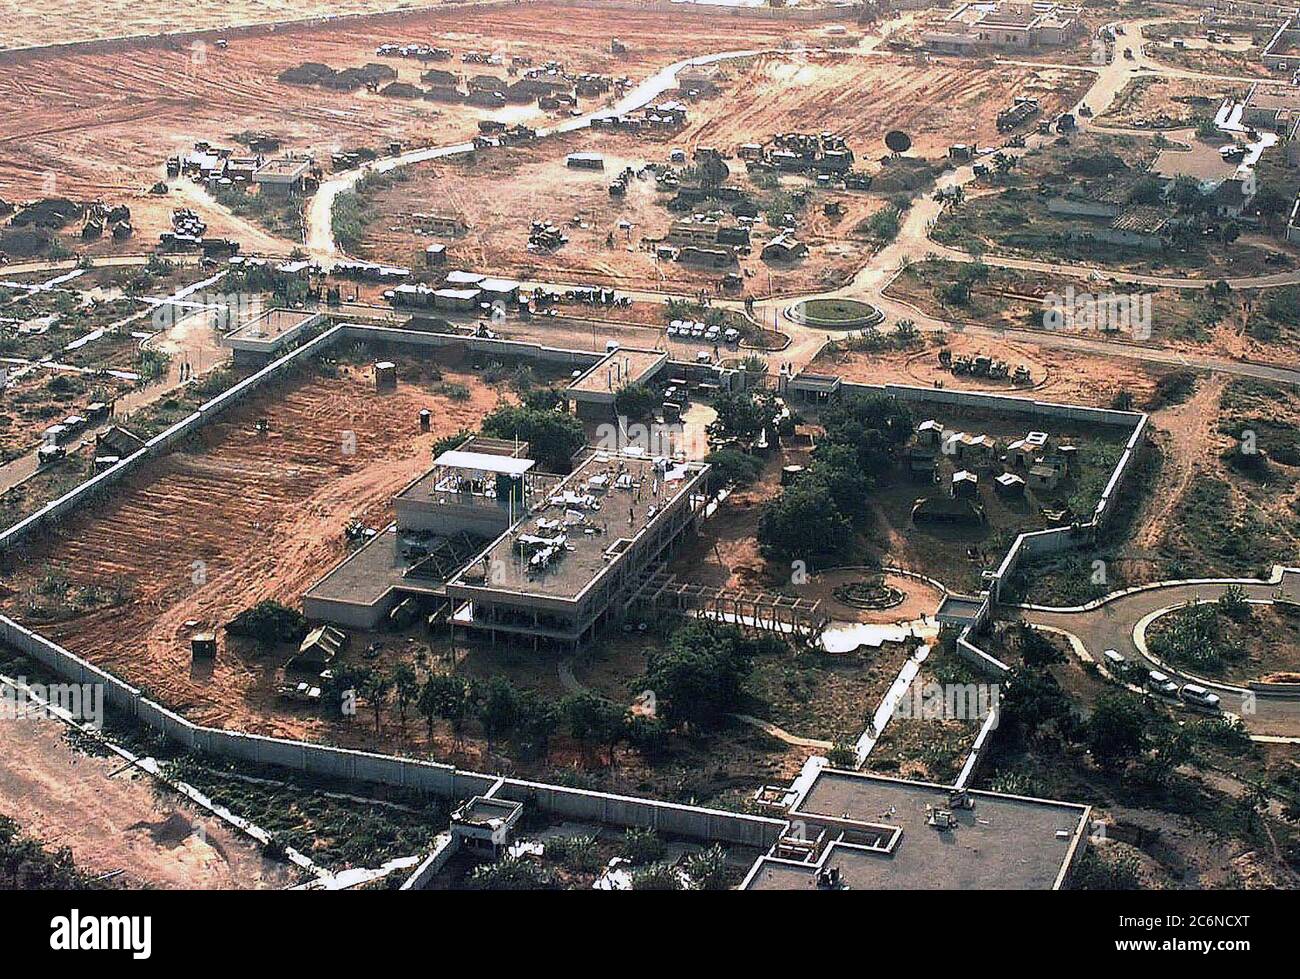 Aerial view of the left side of the US Embassy compound in Mogadishu, Somalia.  The Joint Task Force Headquarters for Restore Hope is located there.  There are plans to build a tent city on the compound.  Several tents and United Nations equipment are located outside the walls of the embassy at the top of the frame.  This mission is in direct support of Operation Restore Hope. Stock Photo